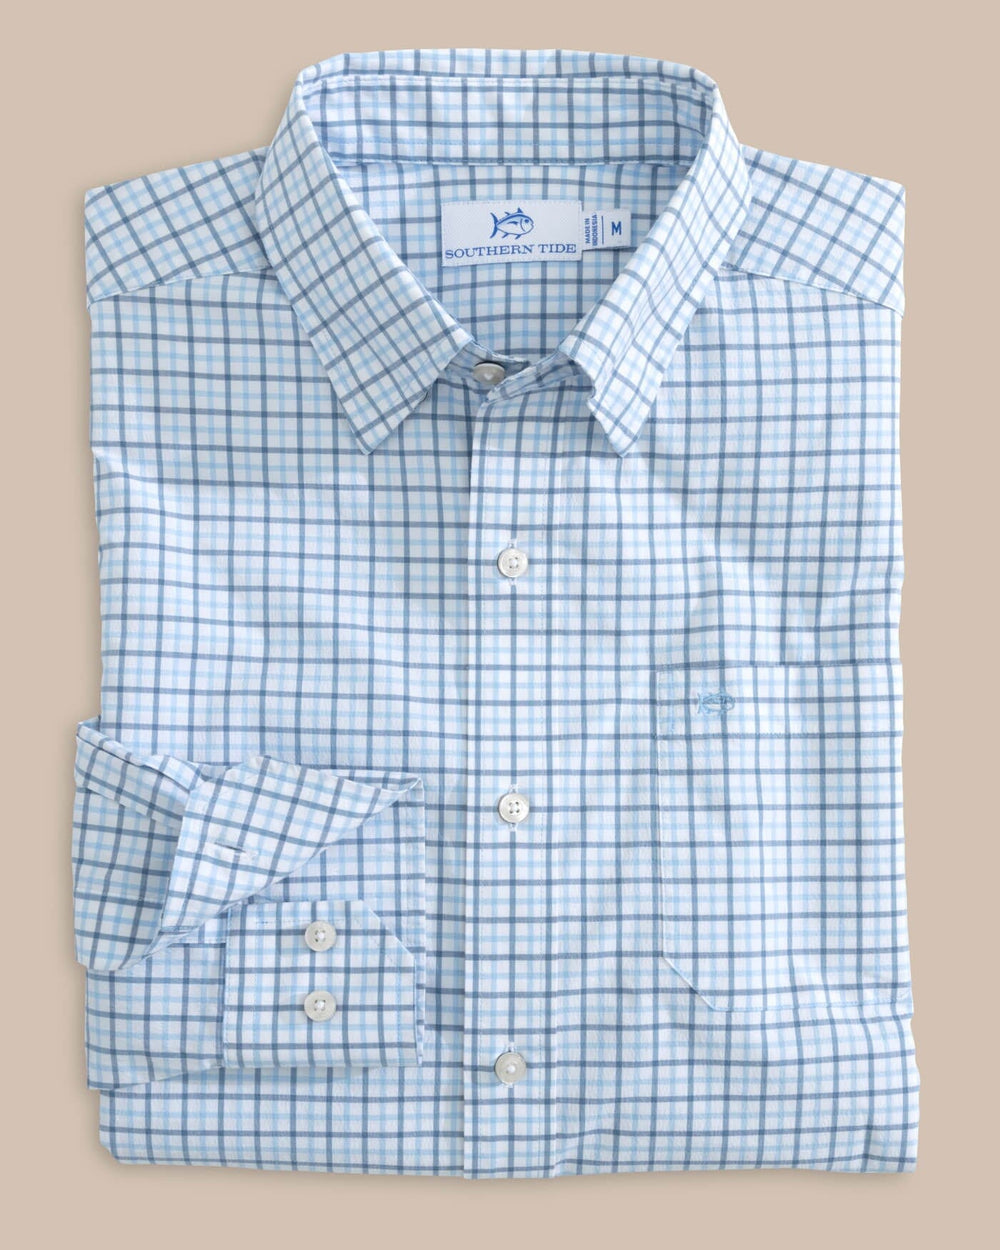 The front view of the Southern Tide Charleston Larkin Check Long Sleeve Sport Shirt by Southern Tide - Clearwater Blue